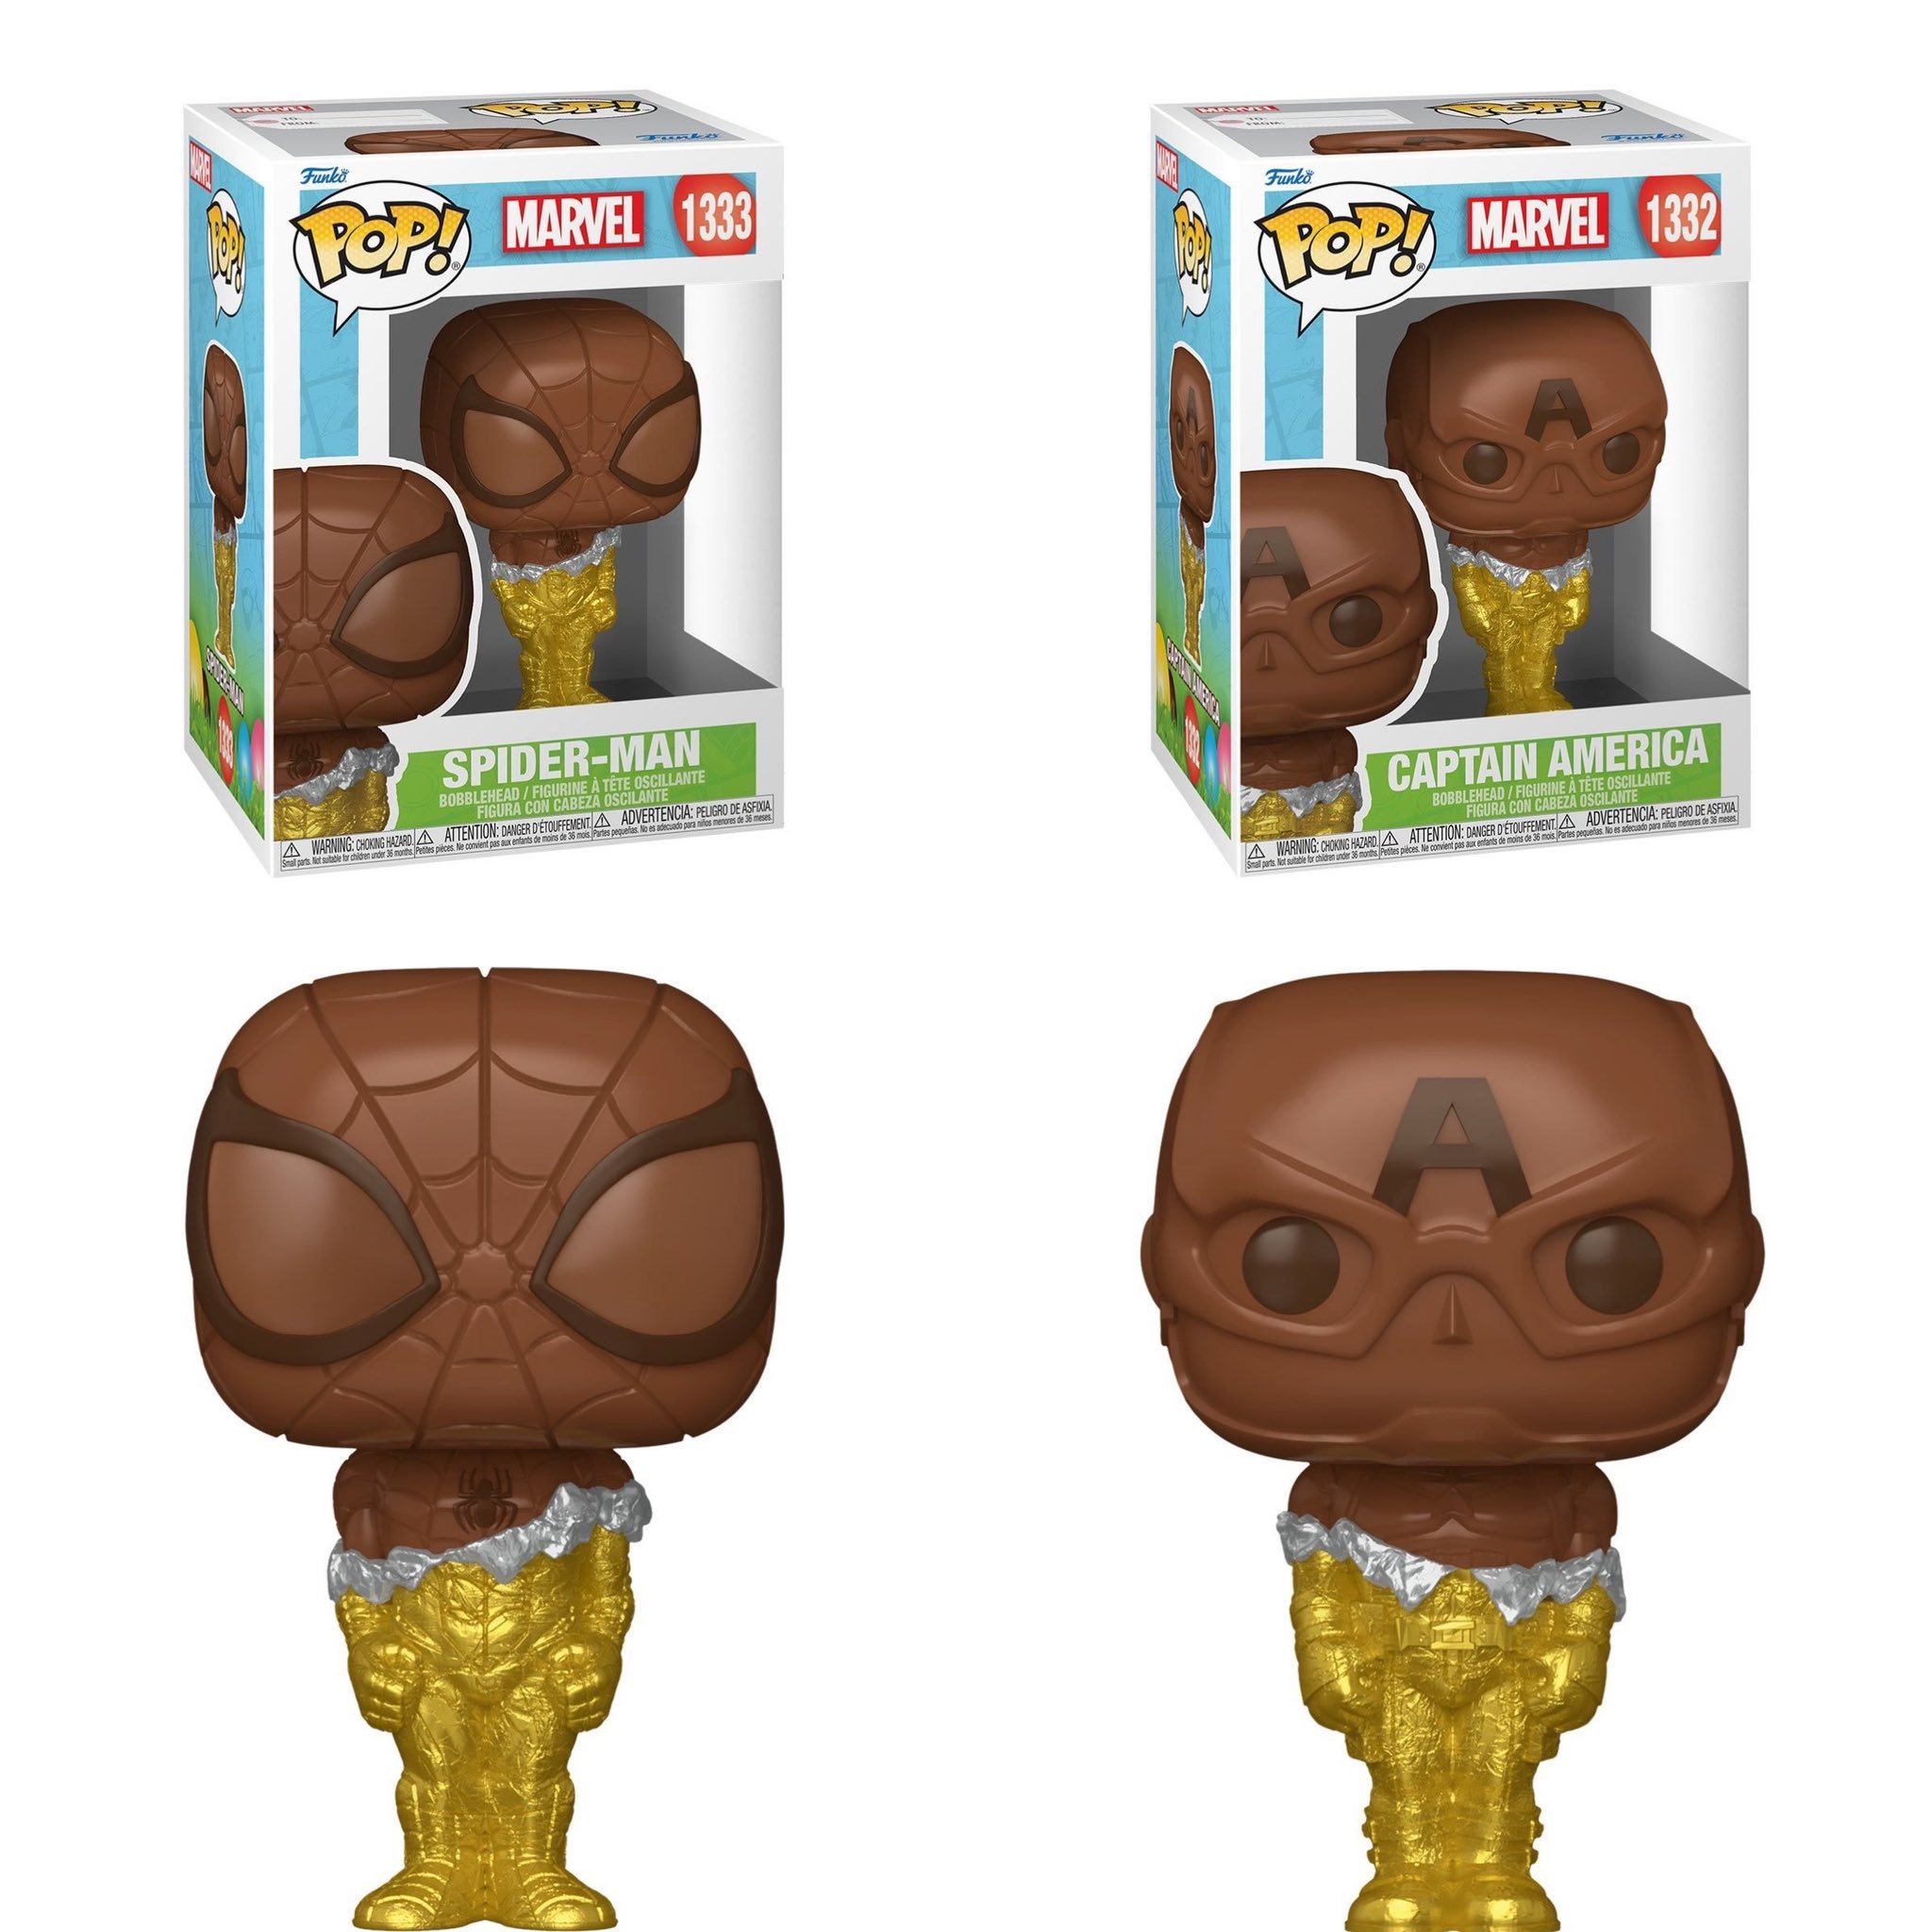 Funko POP News ! on X: First look at the new golden wrapper Chocolate  Spider-Man and Captain America Funko POPs! Thanks @marvelfunkonews ~ #Marvel  #FPN #FunkoPOPNews #Funko #POP #Funkos #POPVinyl #FunkoPOP #FunkoPOPs #